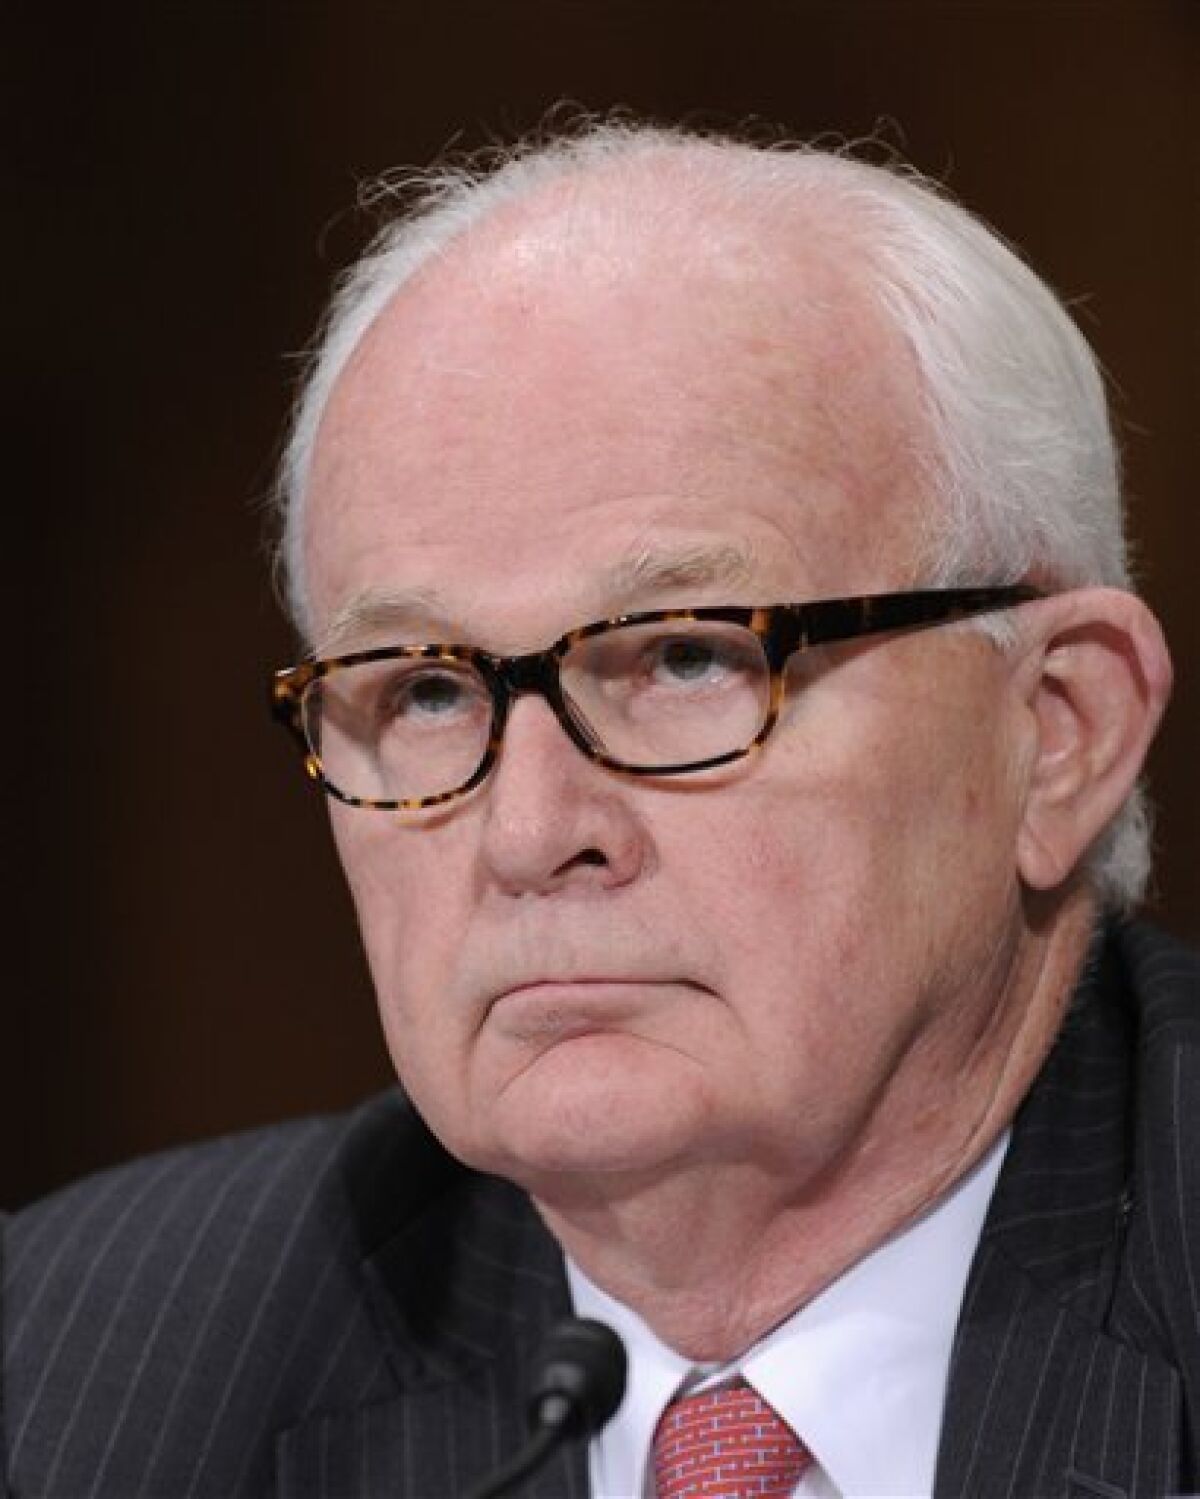 President Barack Obama's special envoy on North Korea, Stephen Bosworth testifies on Capitol Hill in Washington, Thursday, June 11, 2009, before the Senate Foreign Relations Committee. (AP Photo/Susan Walsh)